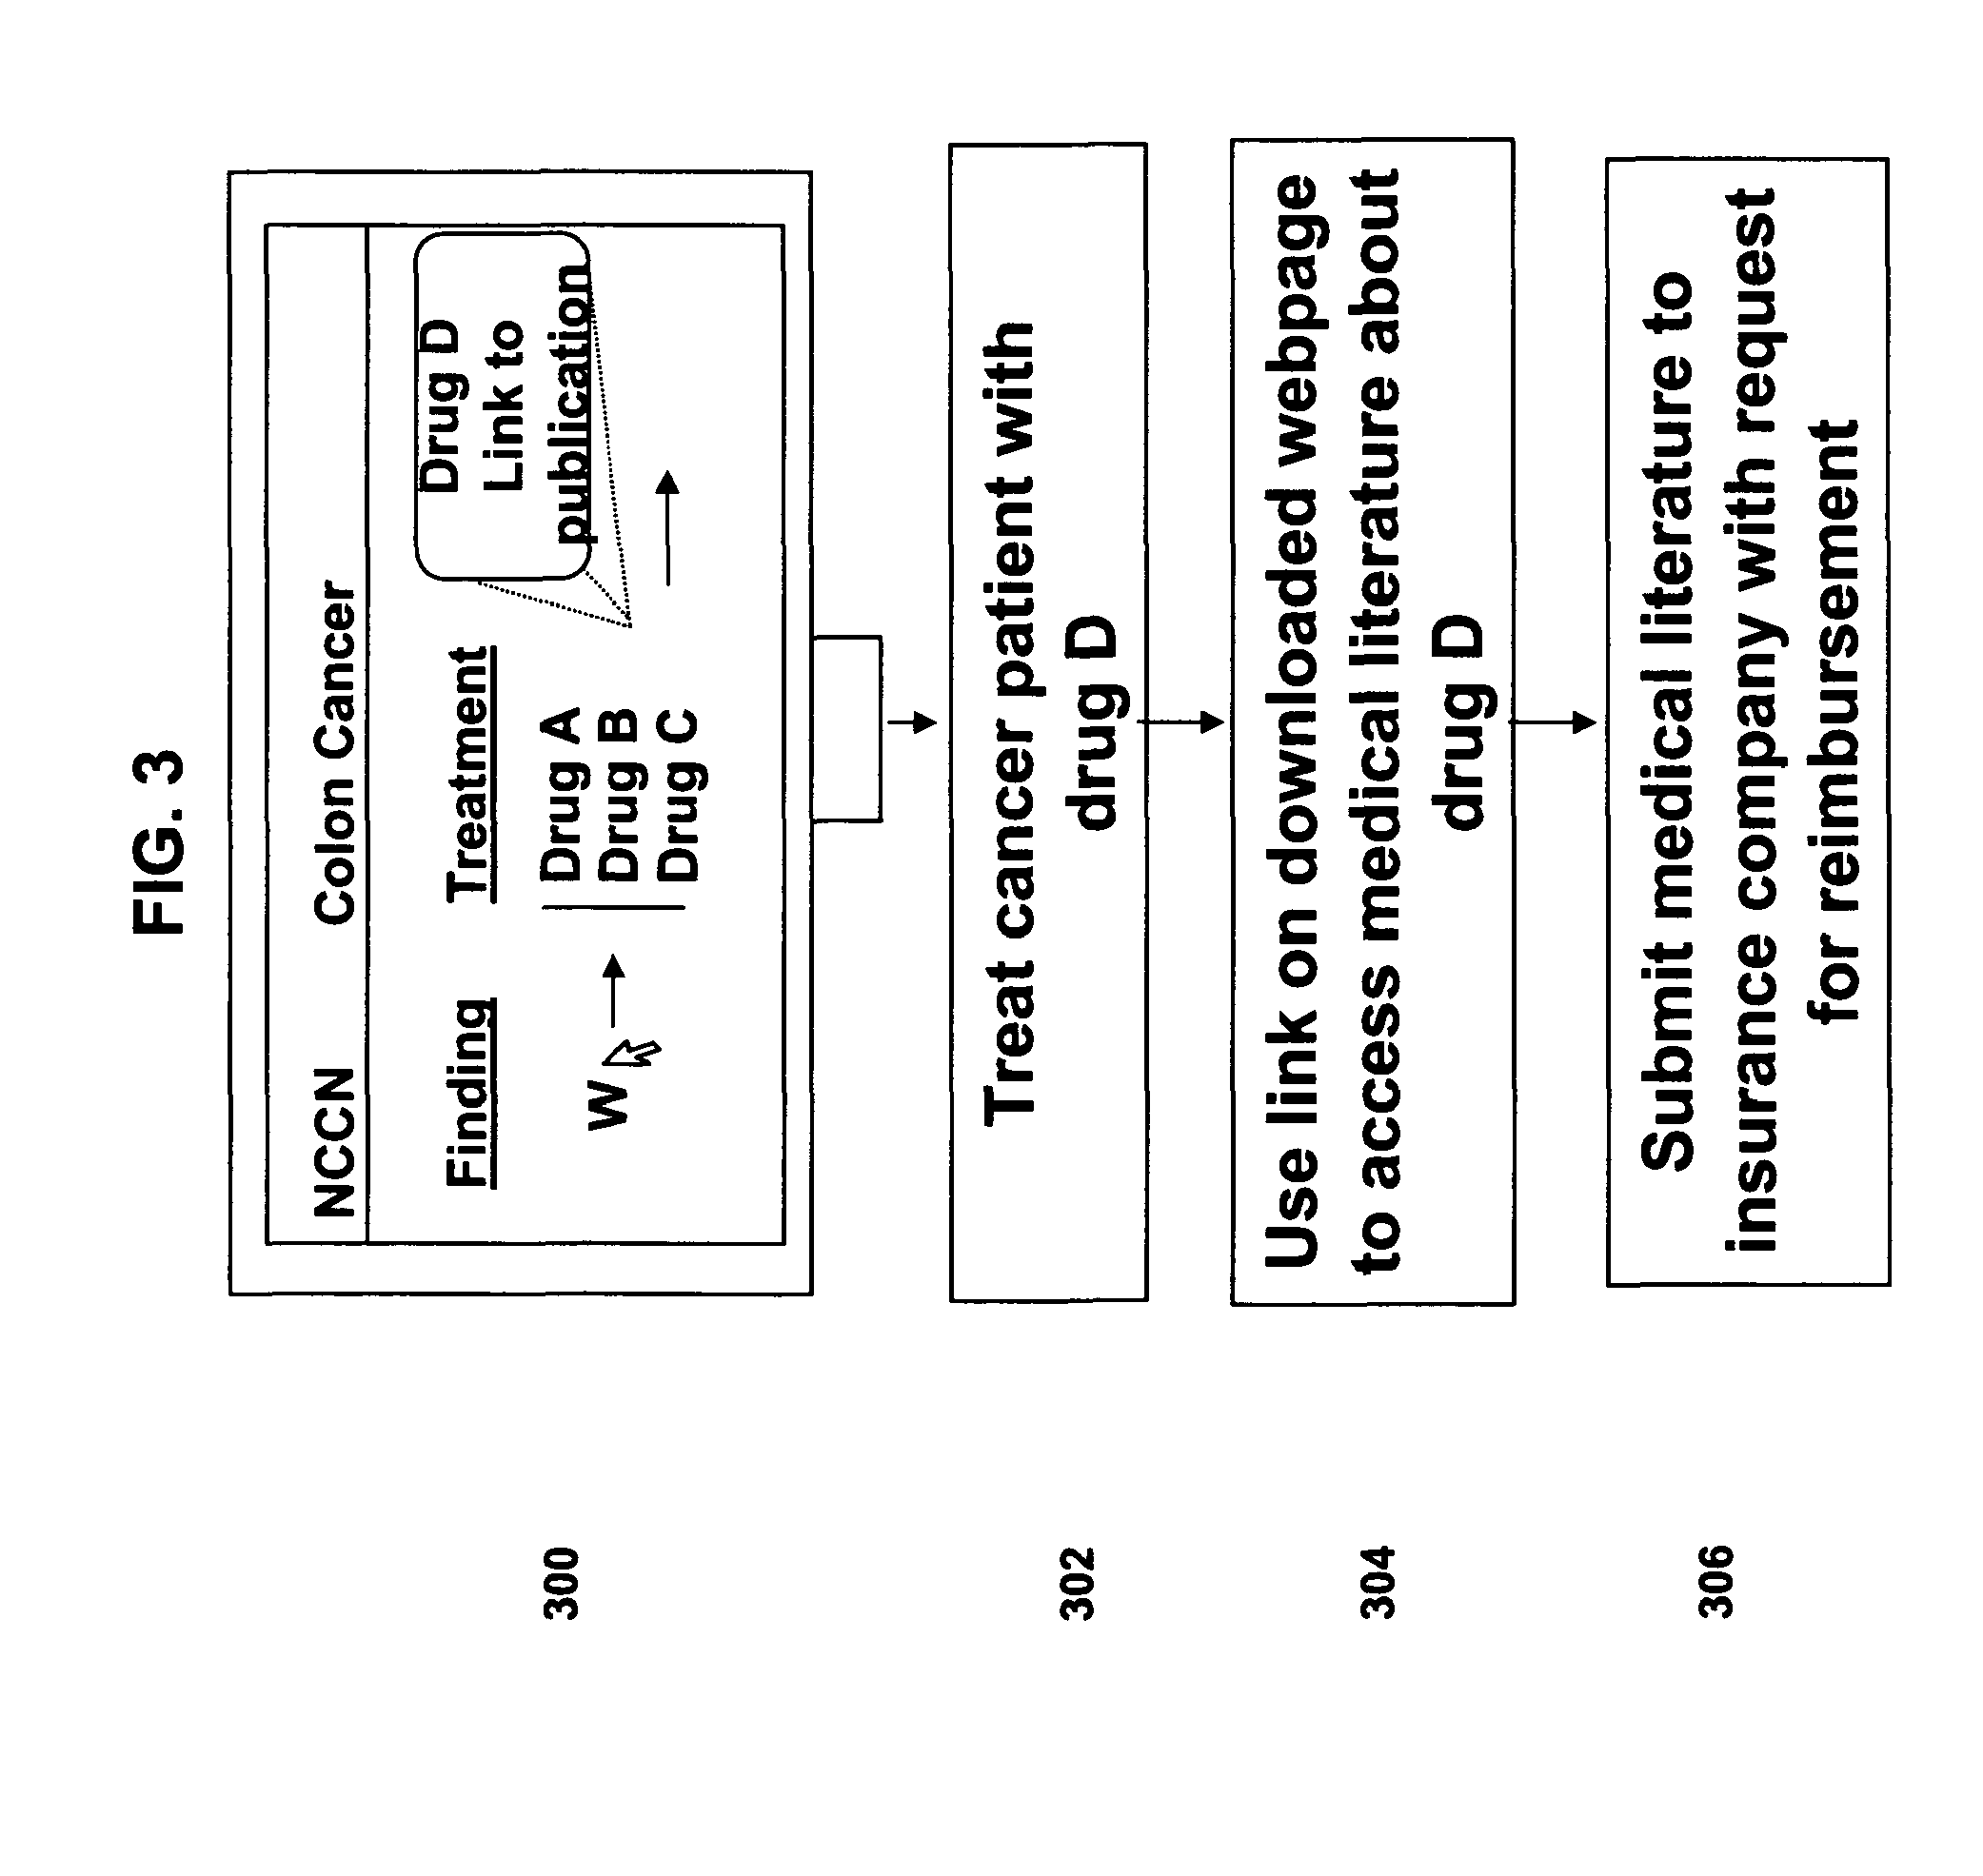 Methods for stratifying and annotating cancer drug treatment options